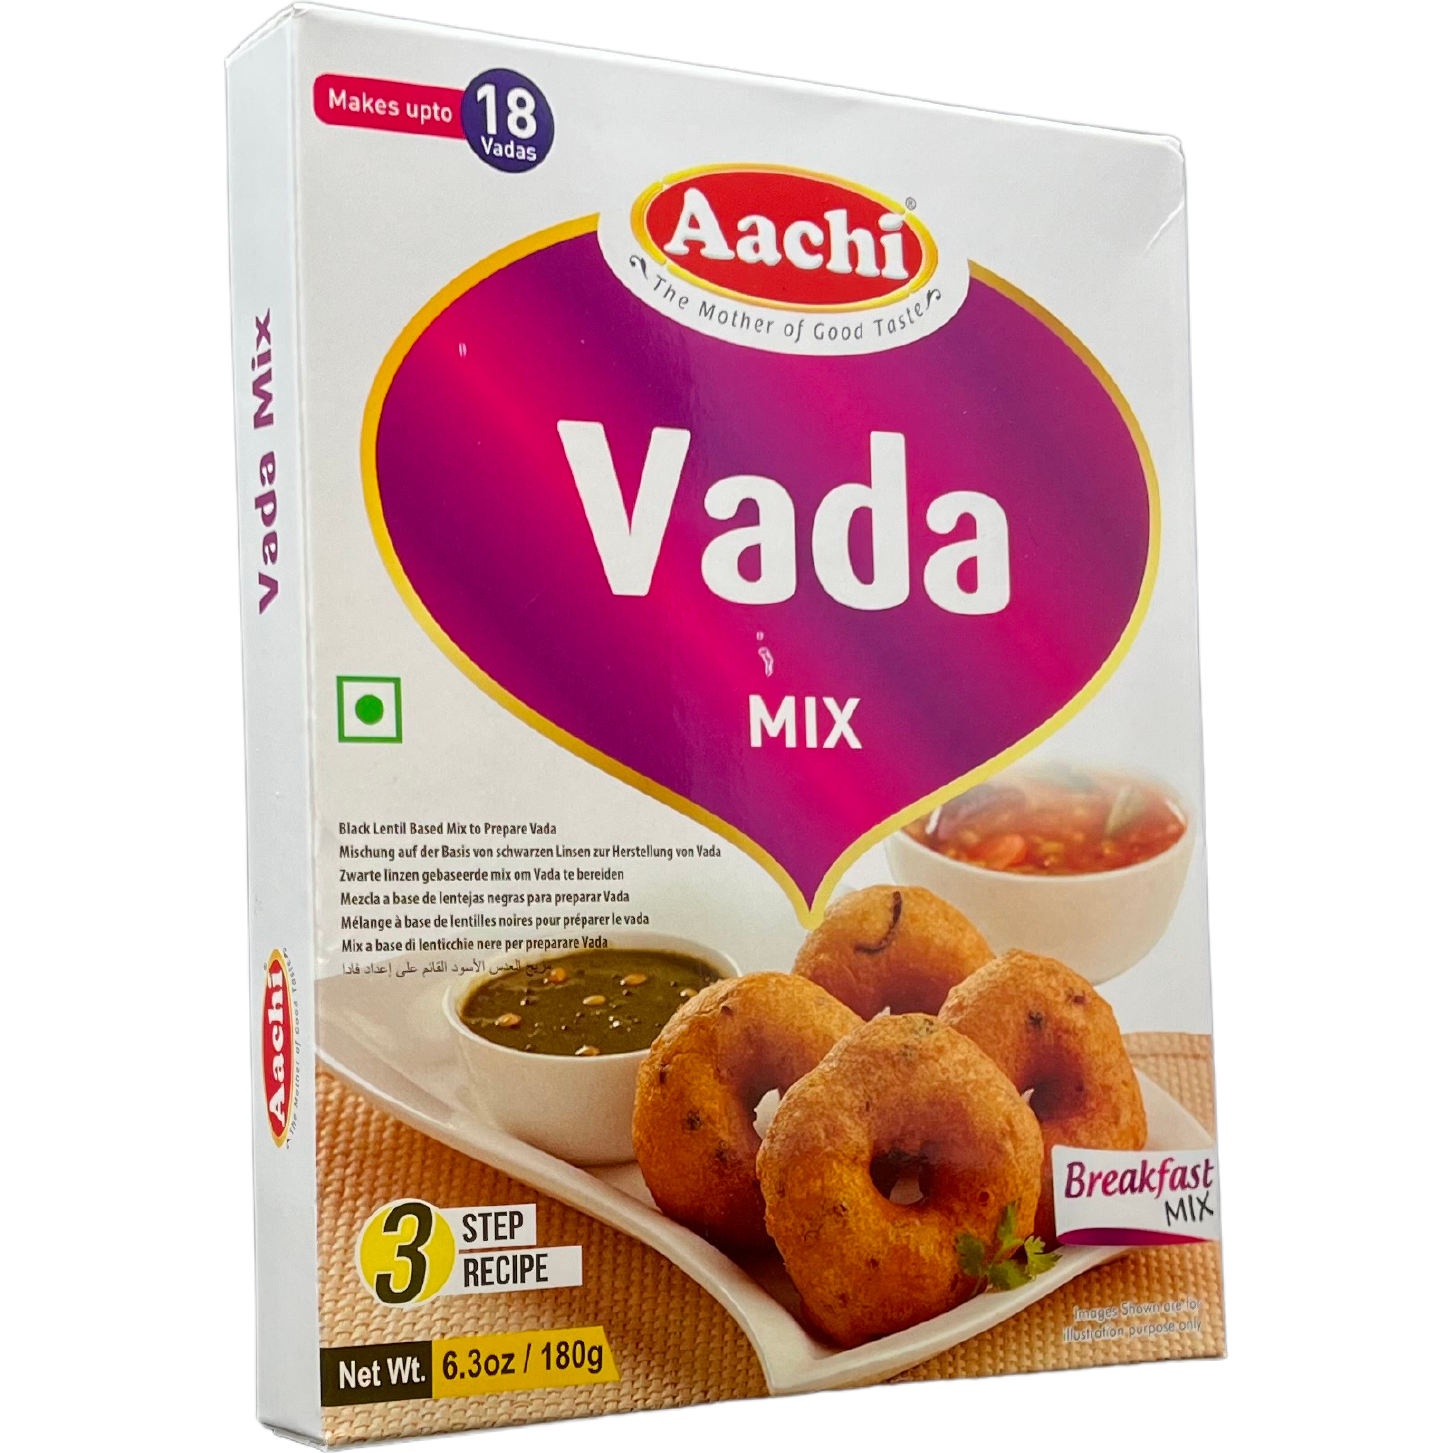 Pack of 2 - Aachi Vada Mix - 200 Gm (7 Oz)